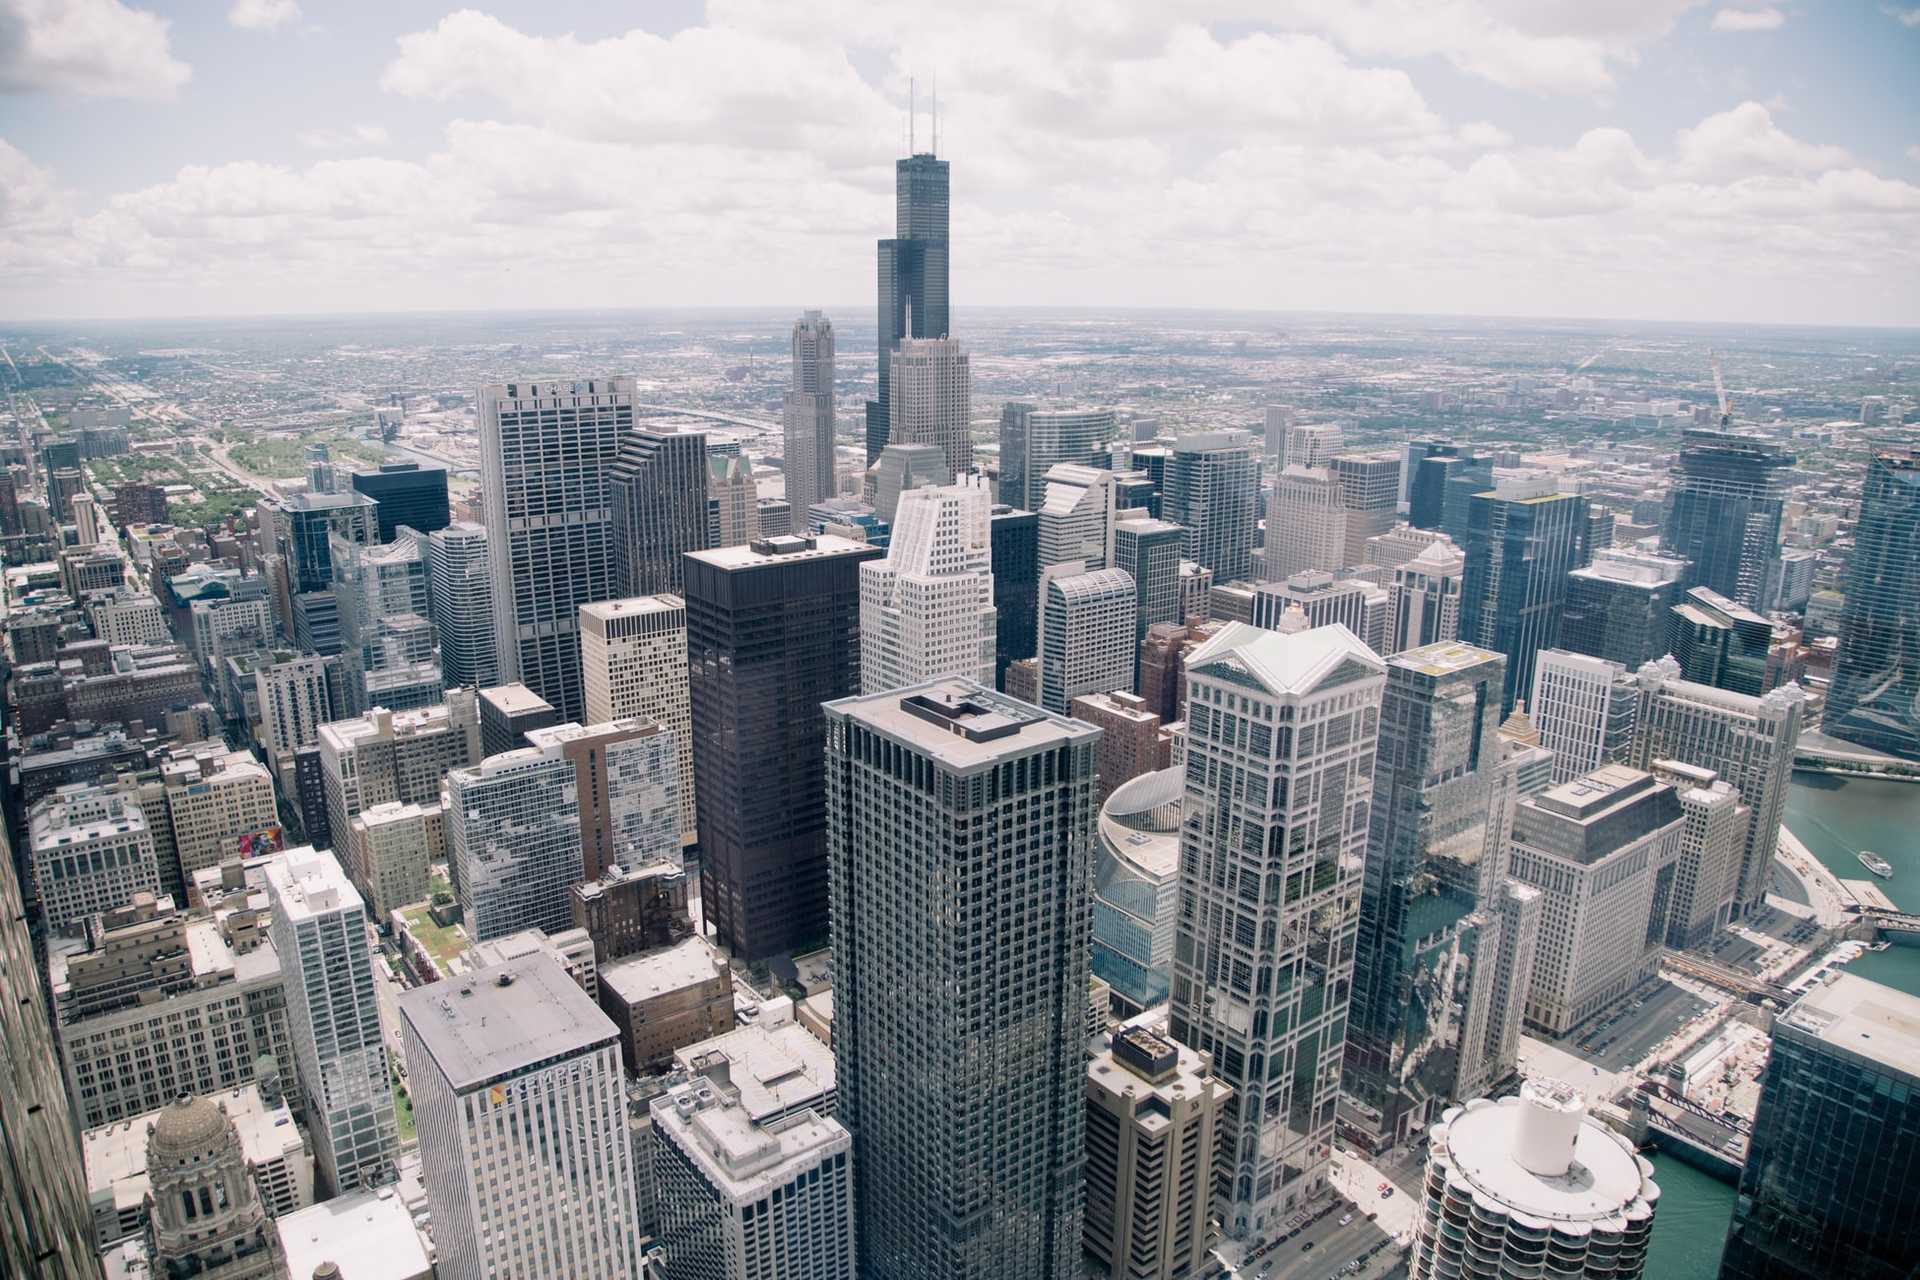 Aerial view of the Chicago skyline.